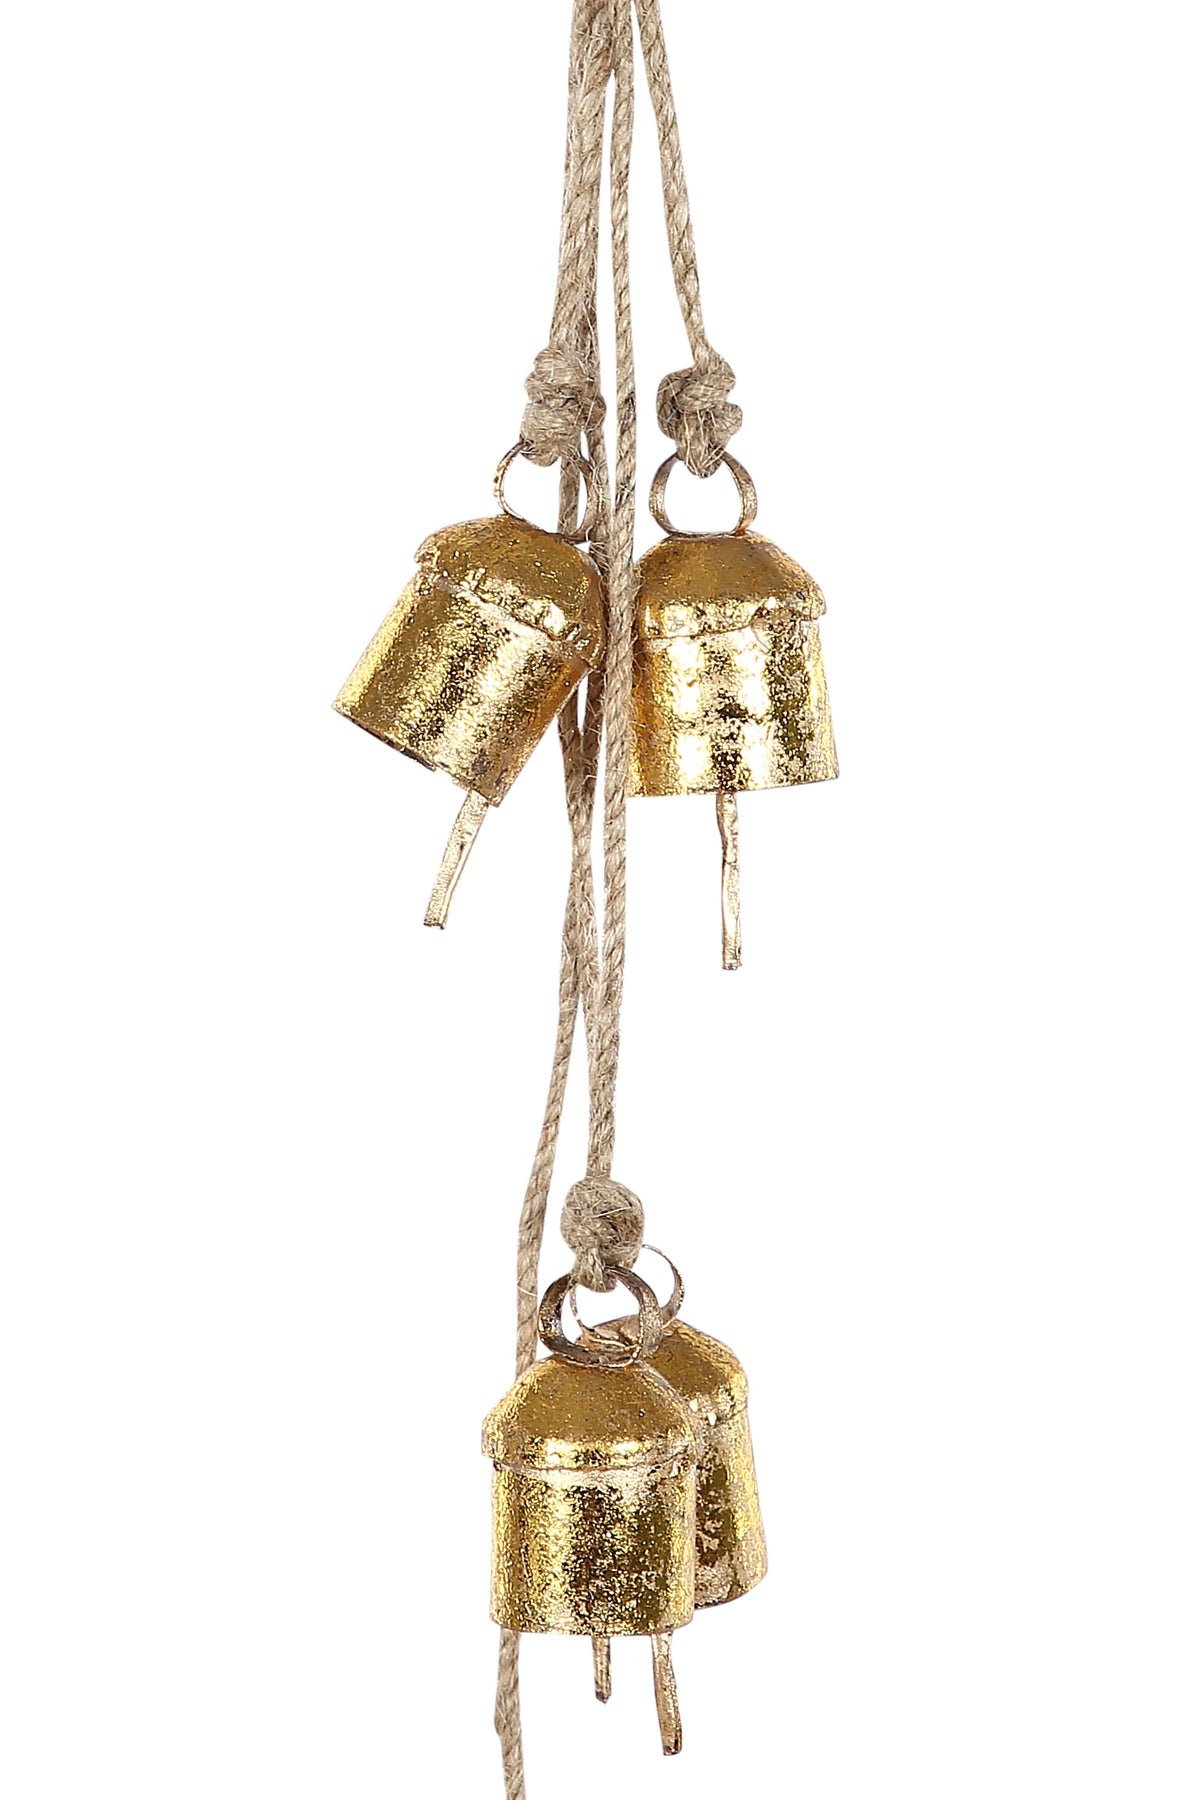 Brass bells on a jute string. Perfect for year round accessorizing or for holiday charm.